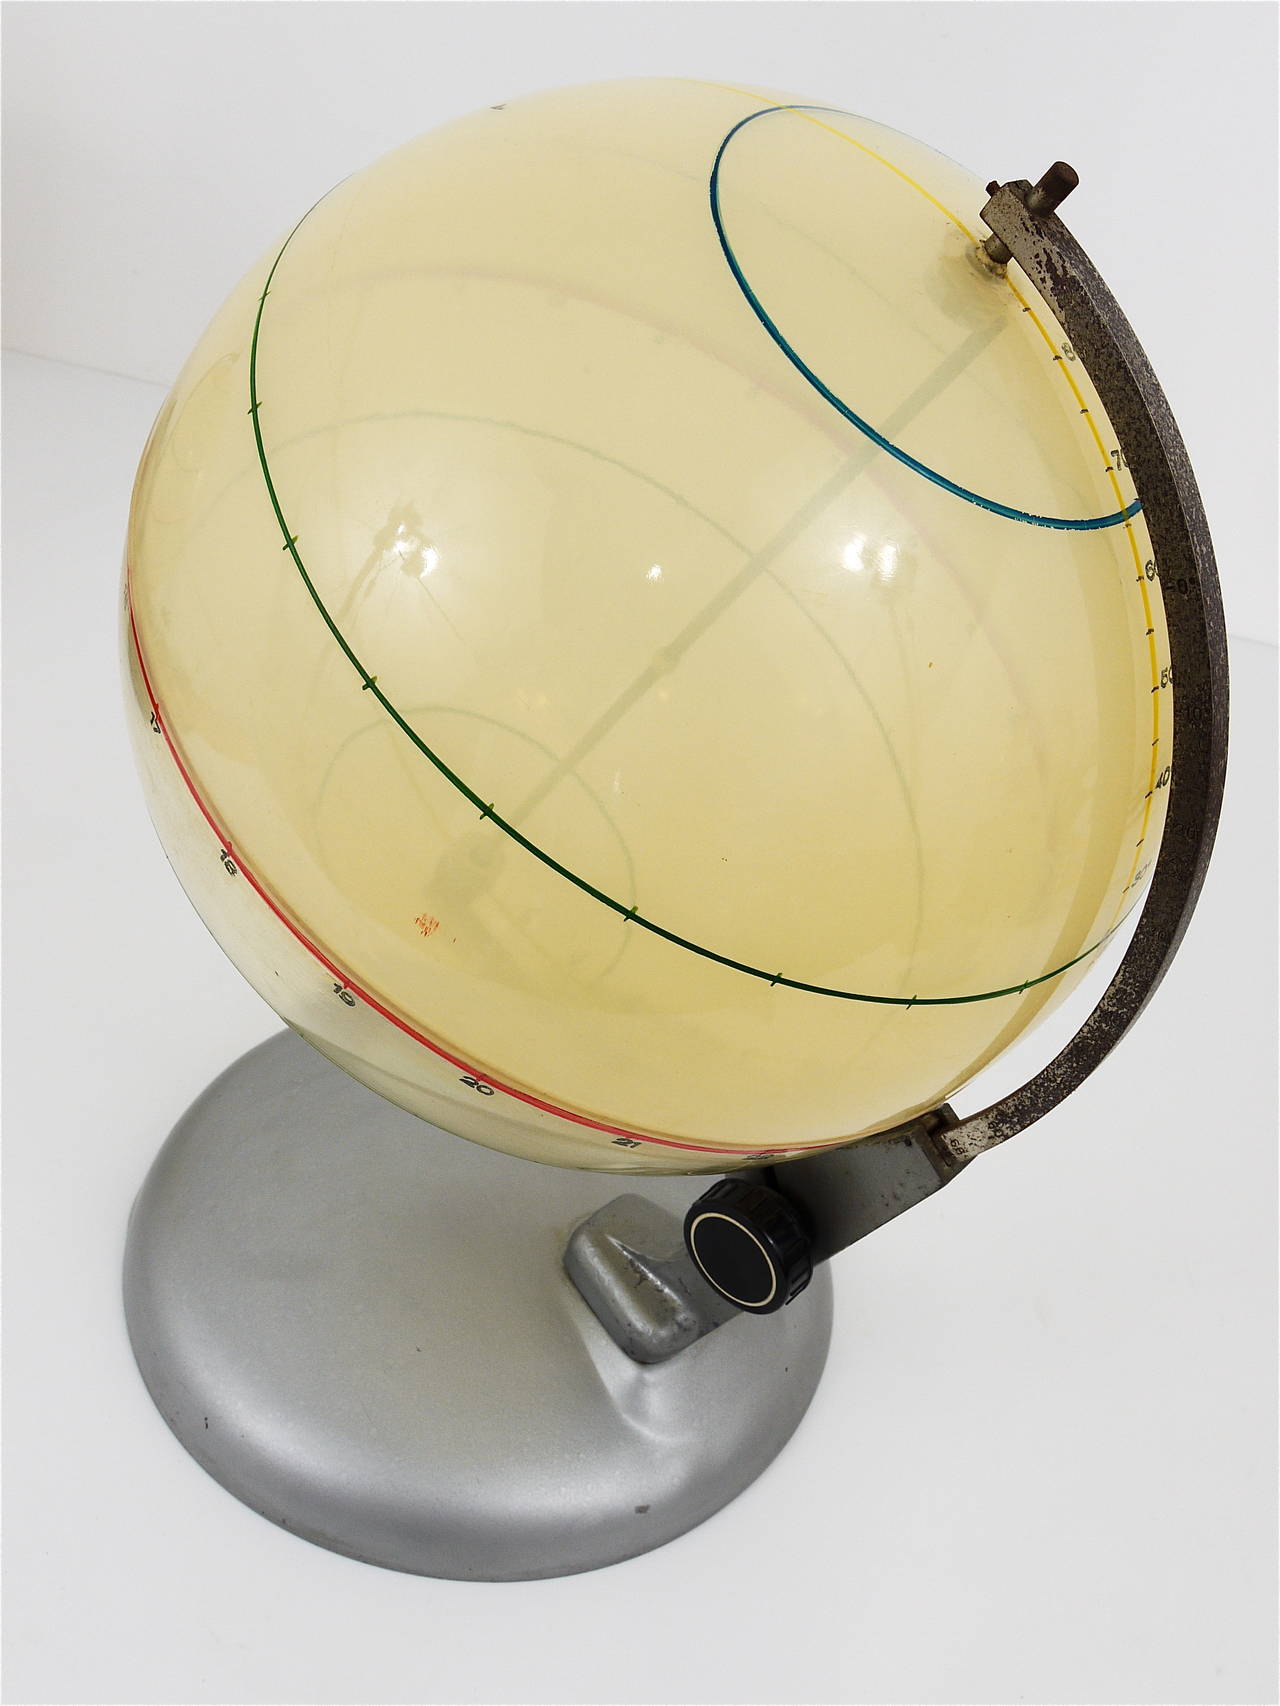 Educational Terrestrial Globe from the 1960s 1